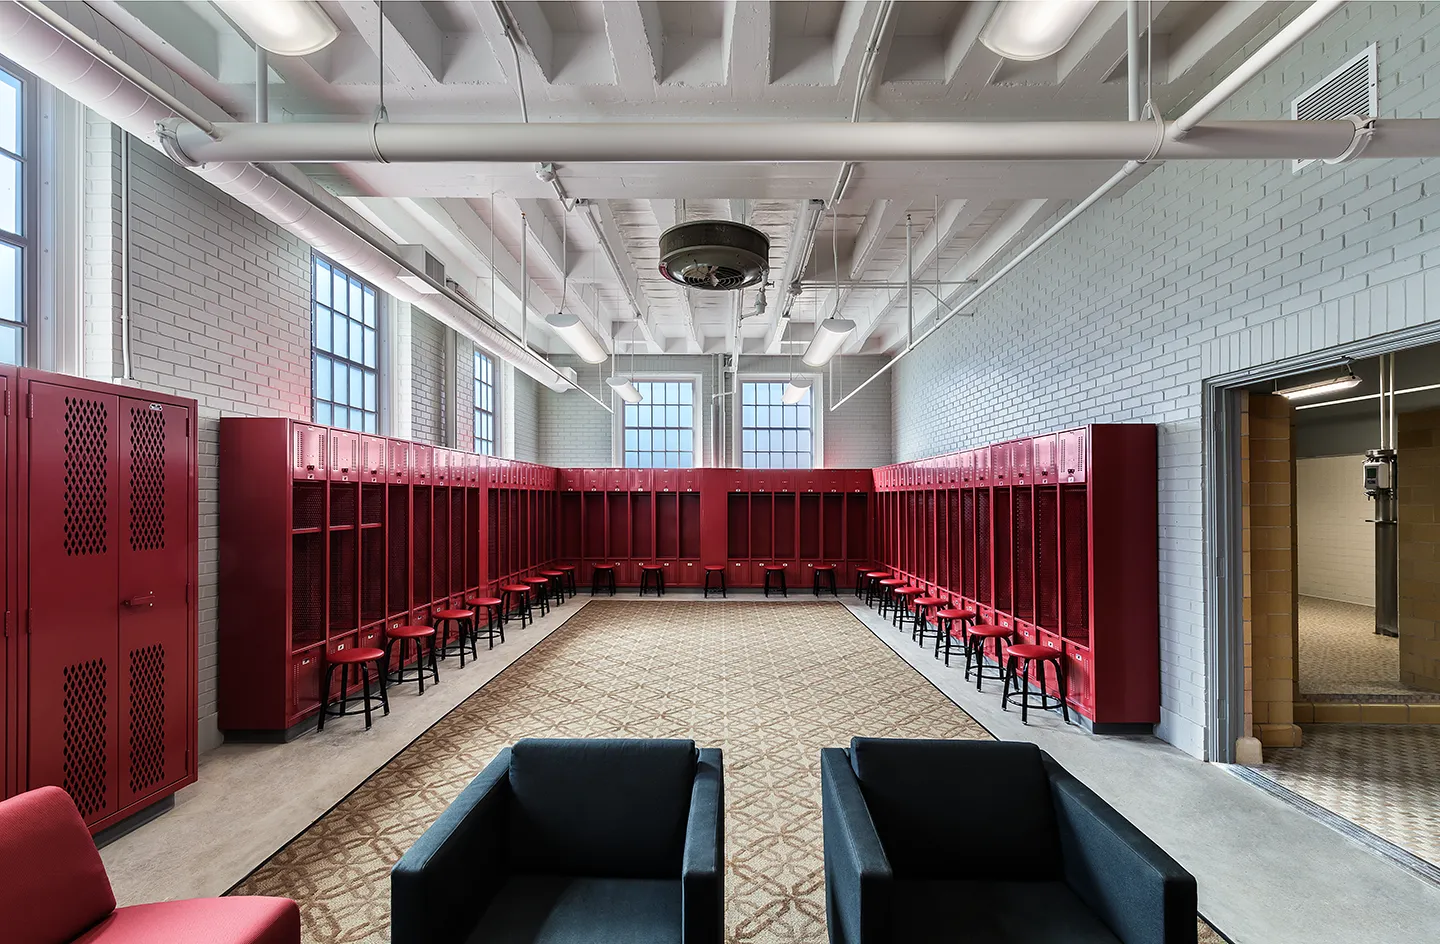 Throughout the lower level of Eby Fieldhouse, locker rooms were added and renovated. This baseball locker room benefits from the character of the 1930s building with high exposed ceilings, natural light, exposed brick, and original ceramic tiles.